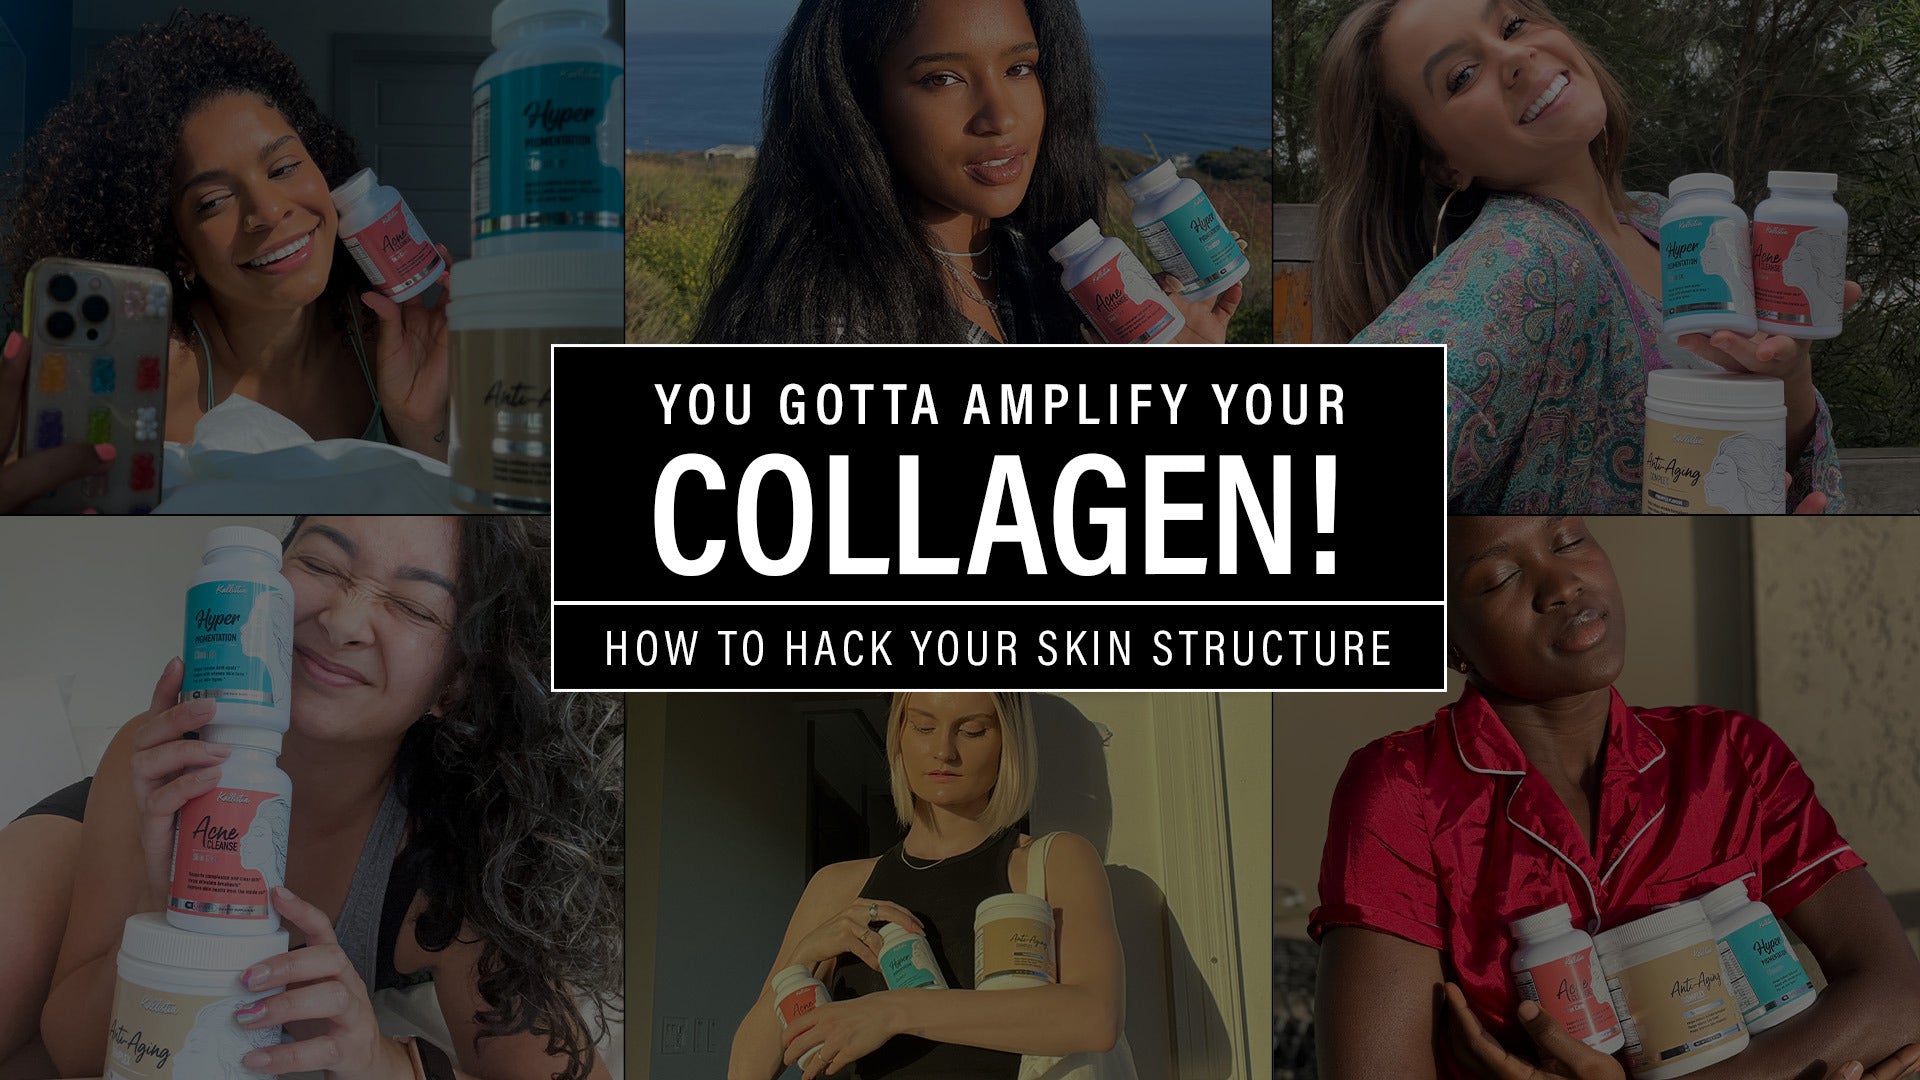 How to hack your skin structure by amplifying your collagen!